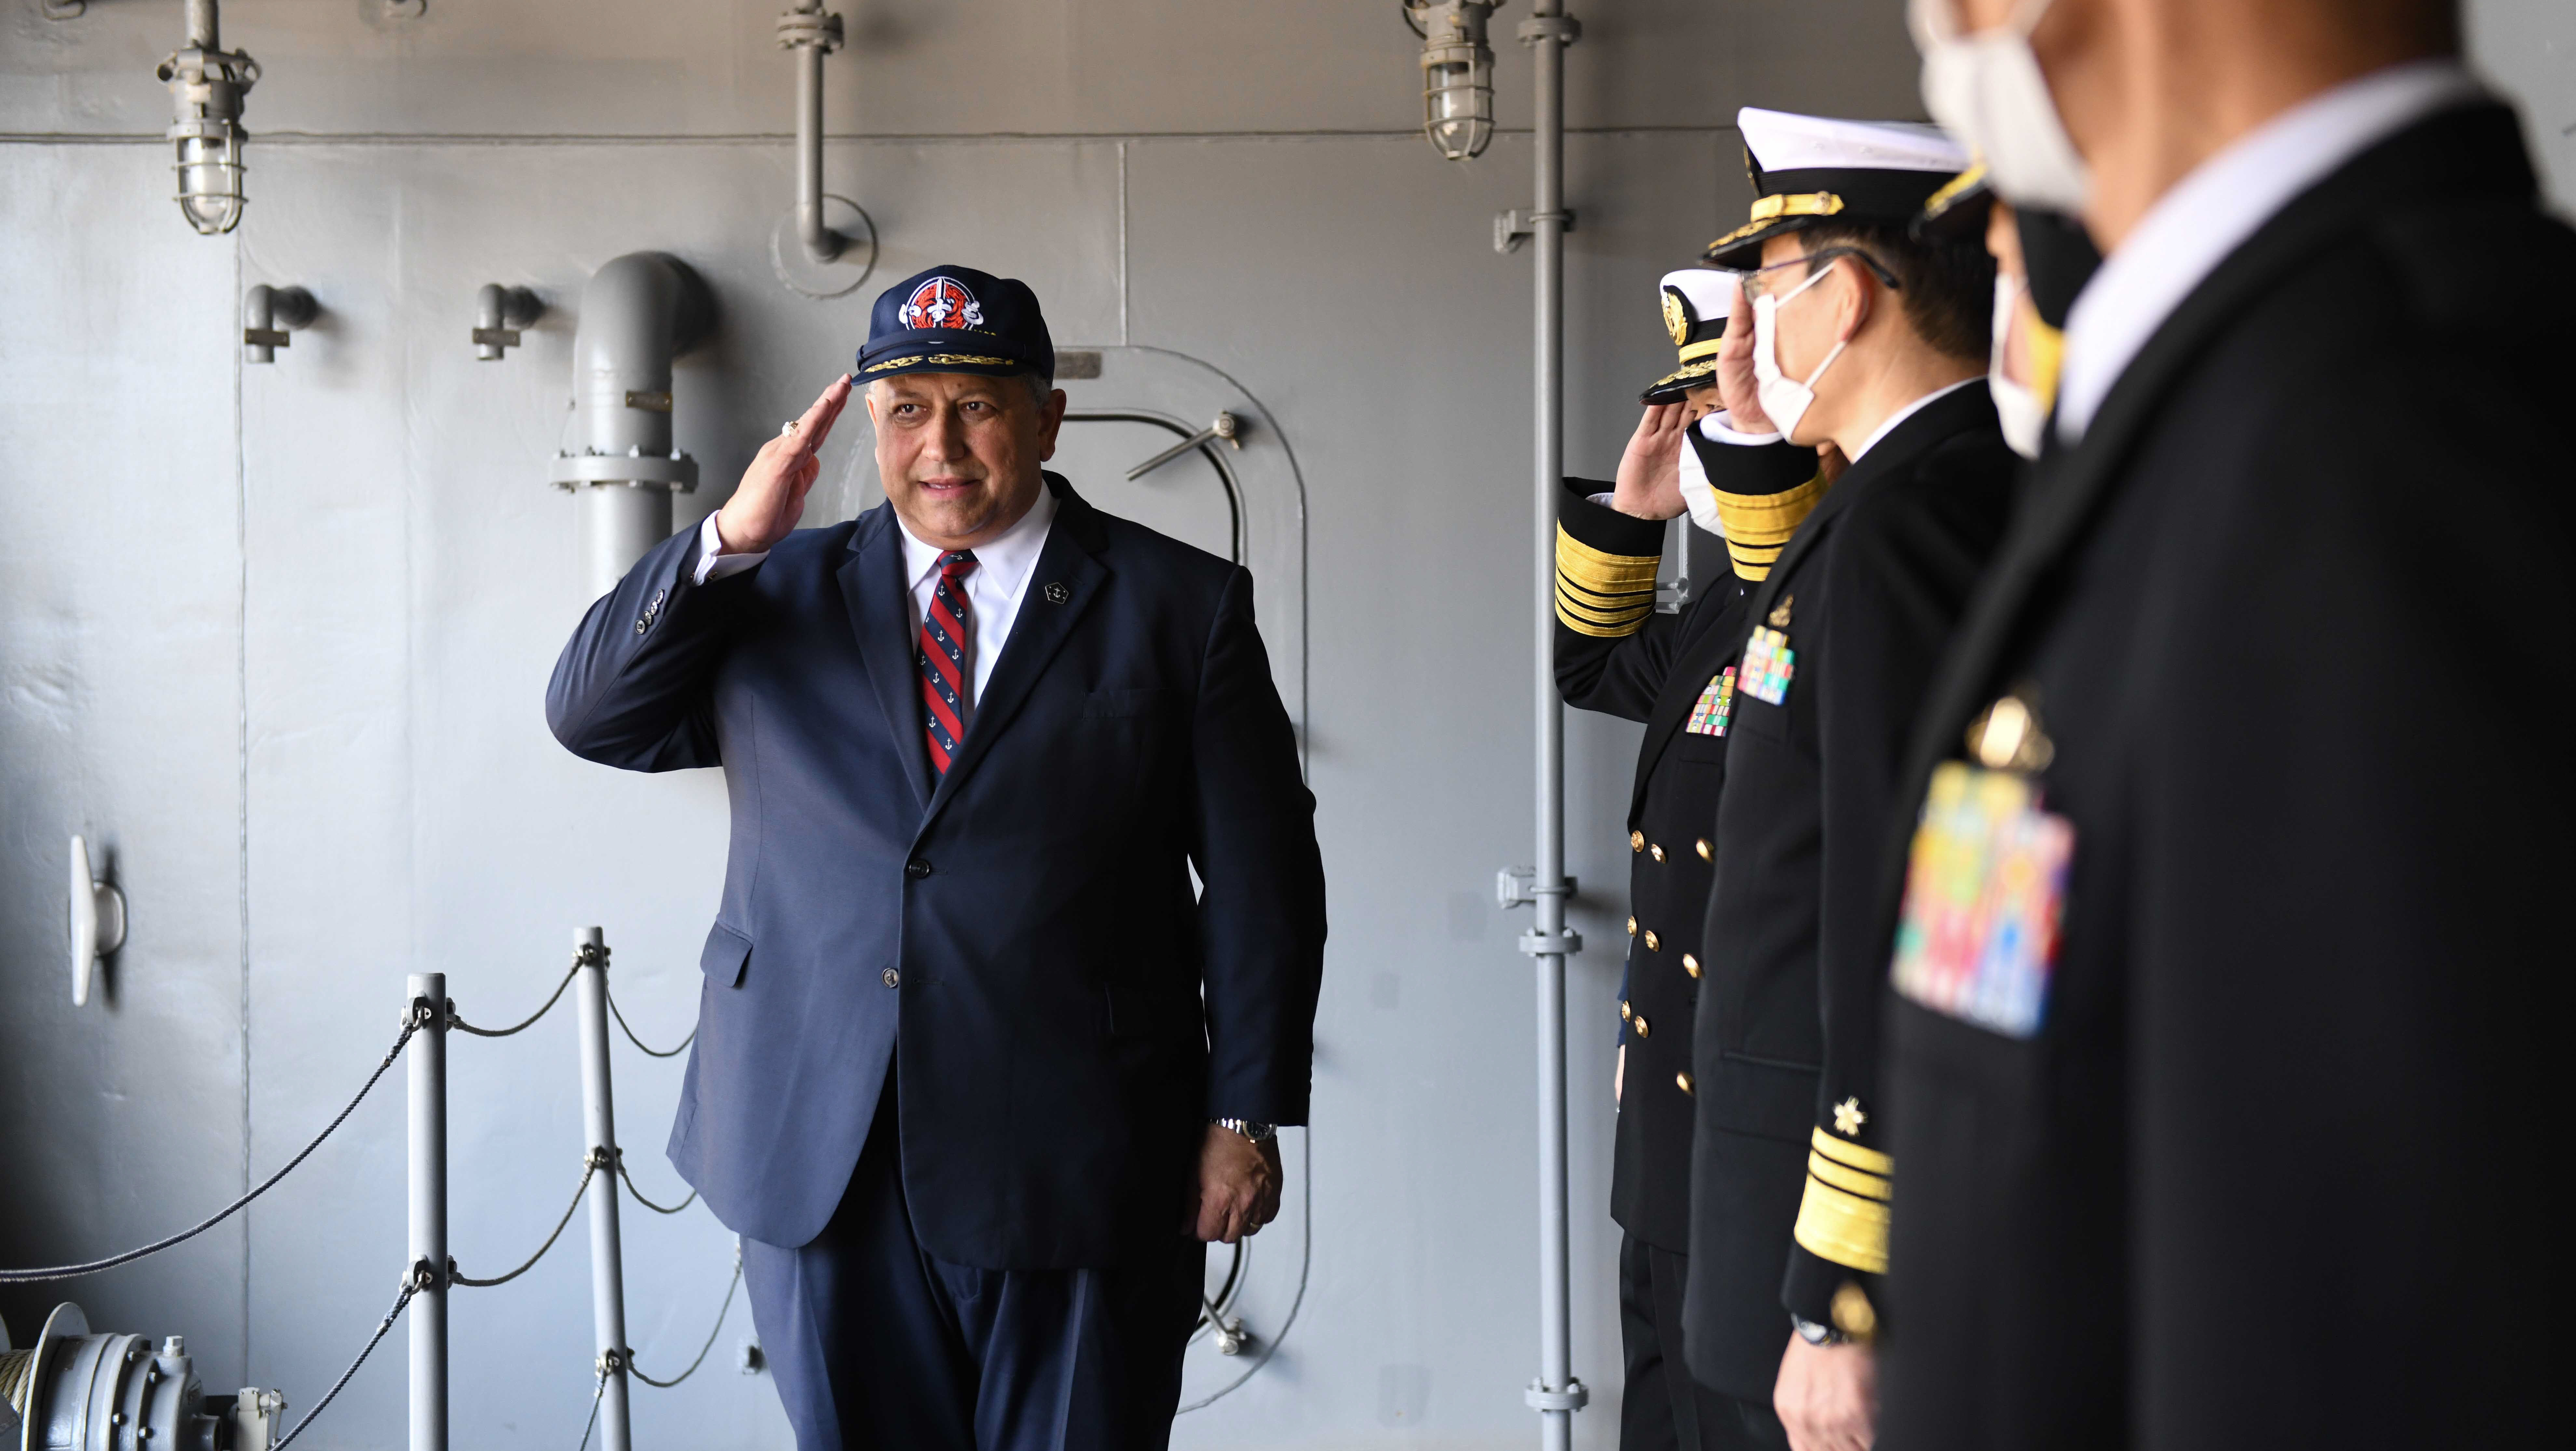 How SECNAV’s claims about S. Korean, Japanese shipbuilders do and do not line up